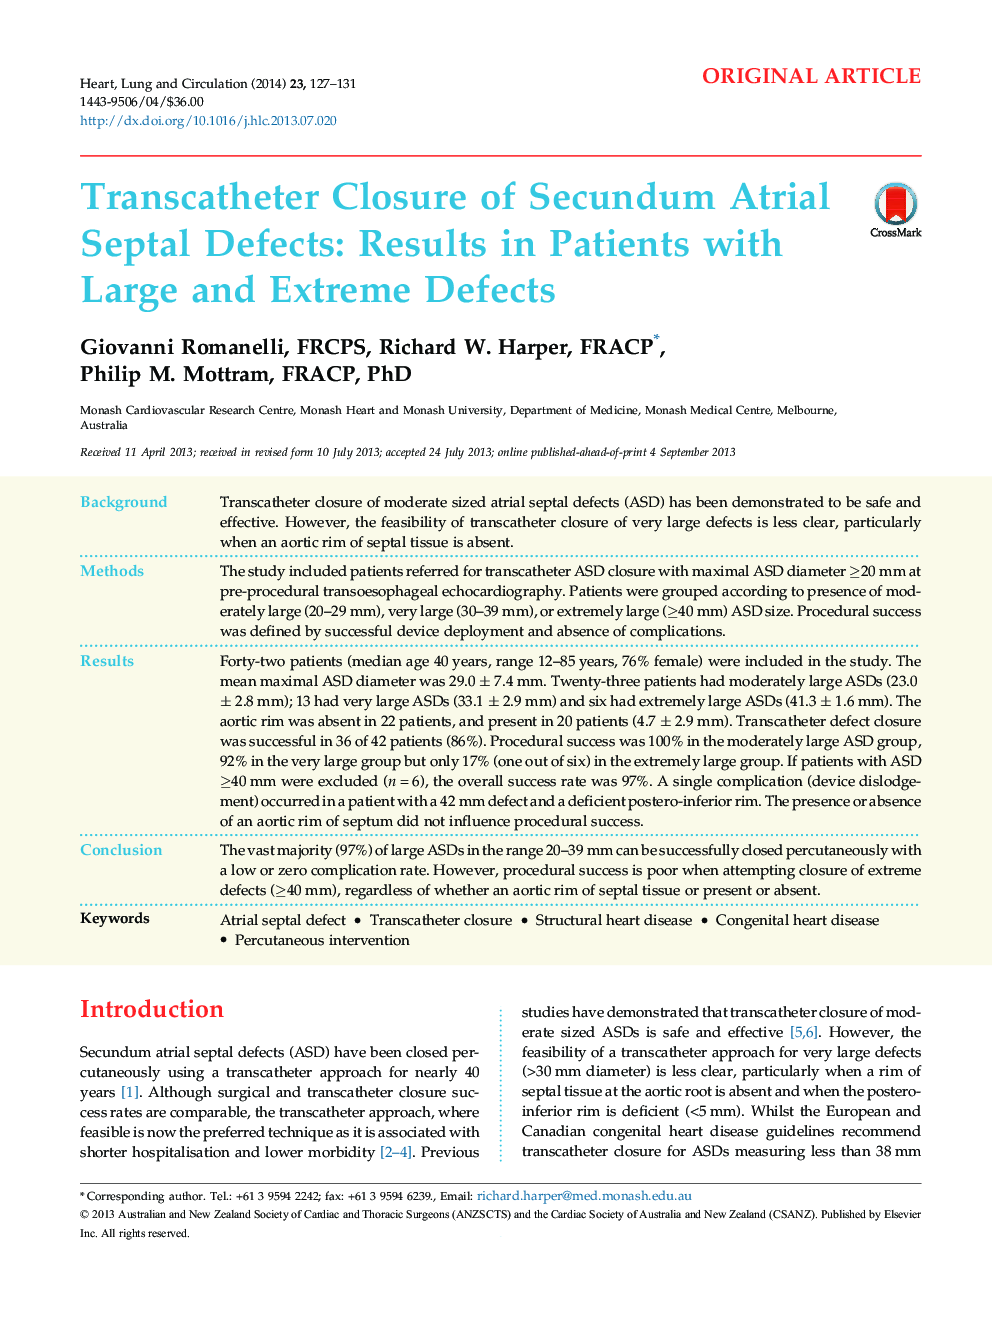 Transcatheter Closure of Secundum Atrial Septal Defects: Results in Patients with Large and Extreme Defects